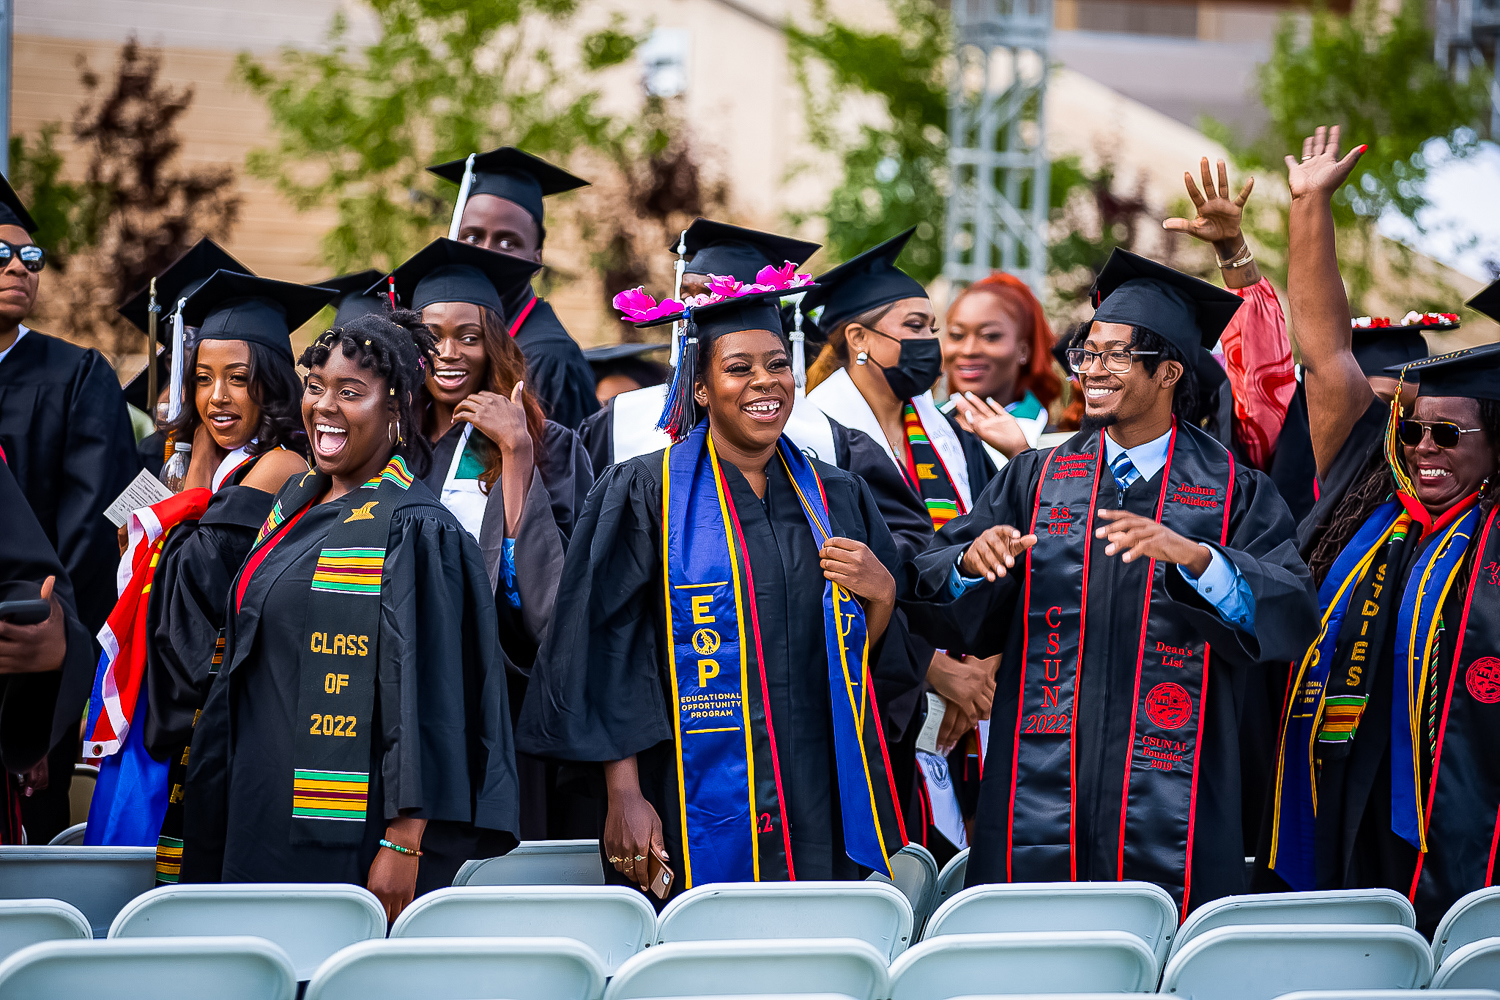 Graduates of the class of 2021-2022 smile at the friends and family in attendance during the 50th celebration of Black Graduation on May 15, 2022, in front of the University Library in Northridge, Calif.